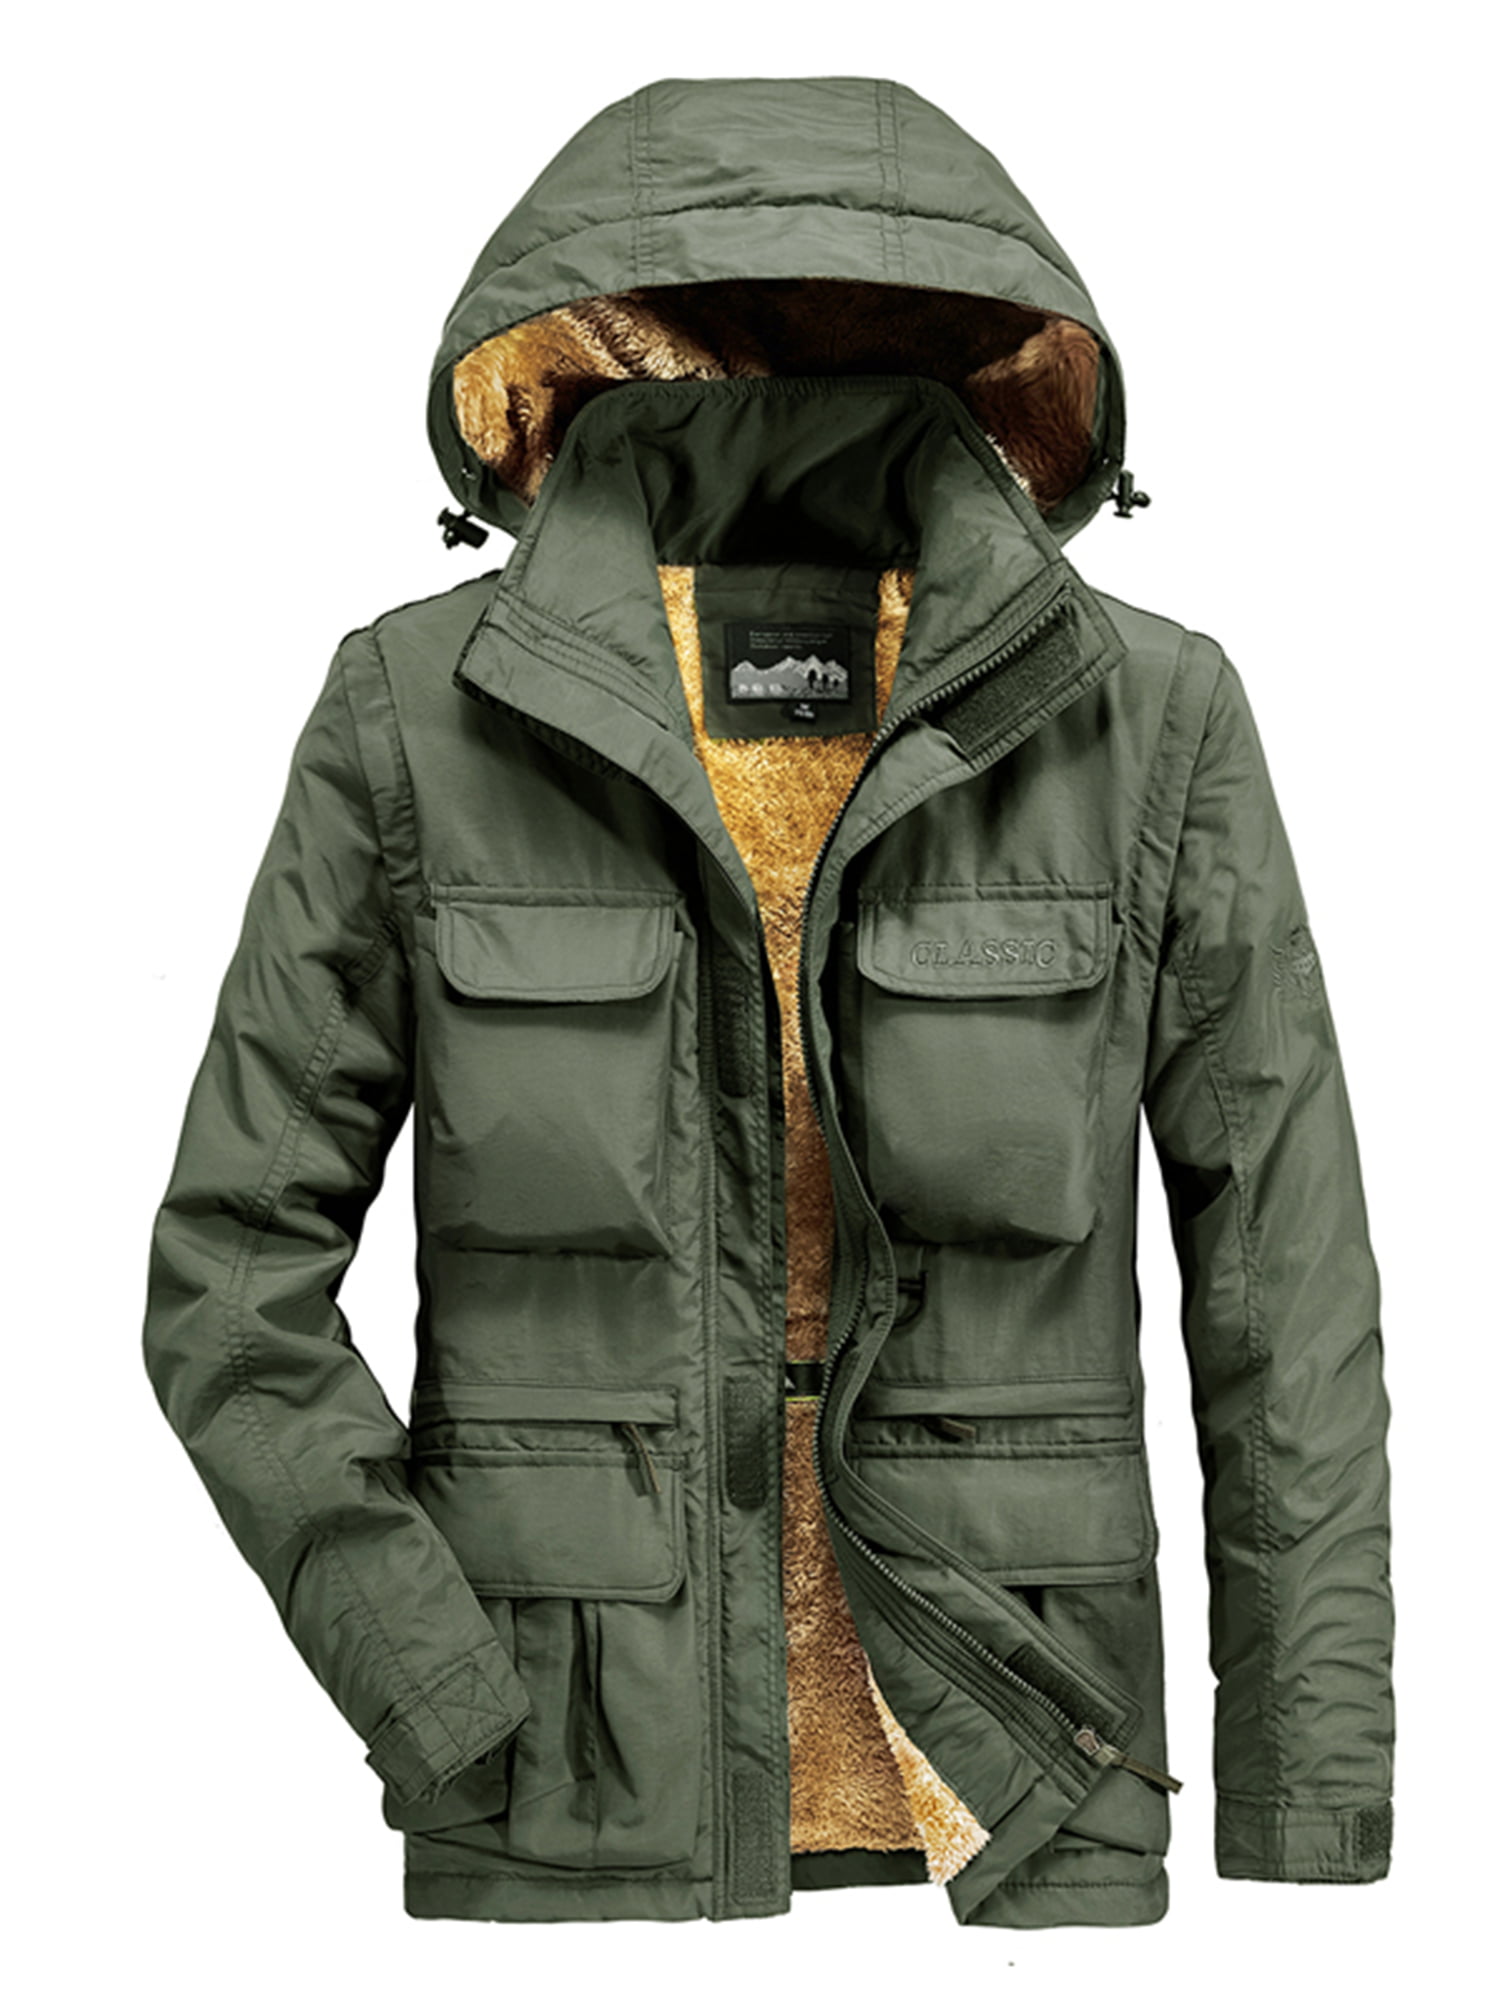 Men's Winter Thicken Jacket Outwear Coat with Removable Hood Shoulder ...